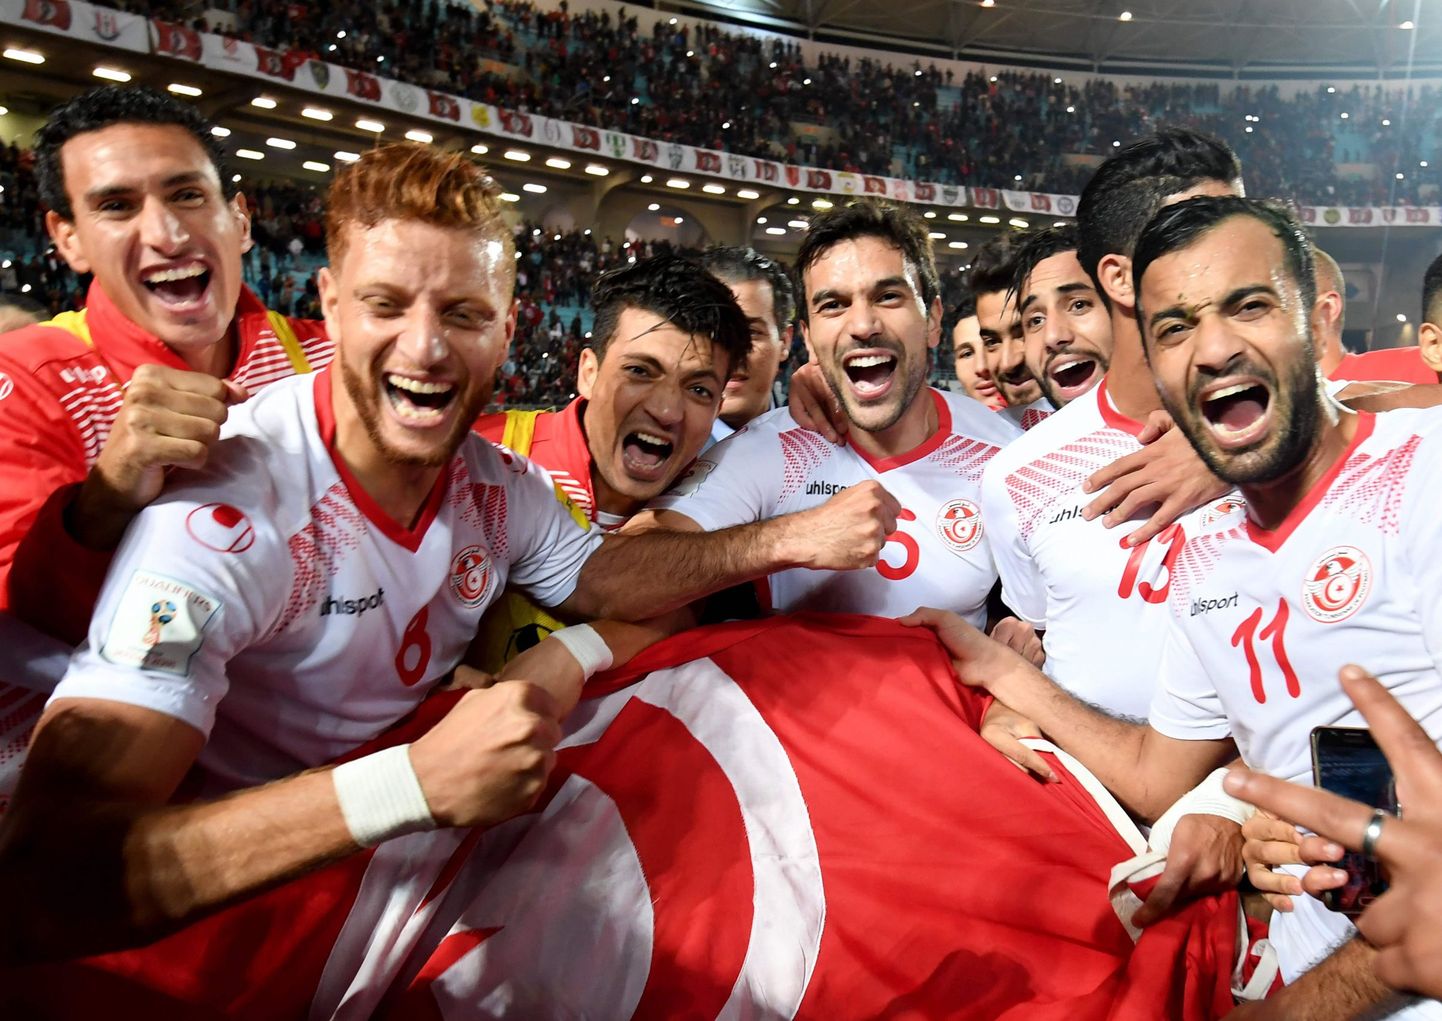 Players of the Tunisian national football team celebrate with their national flag after qualifying for the 2018 World Cup finals after winning their qualifiers match against Libya at the Rades Olympic Stadium in the capital Tunis on November 11, 2017. / AFP PHOTO / FETHI BELAID